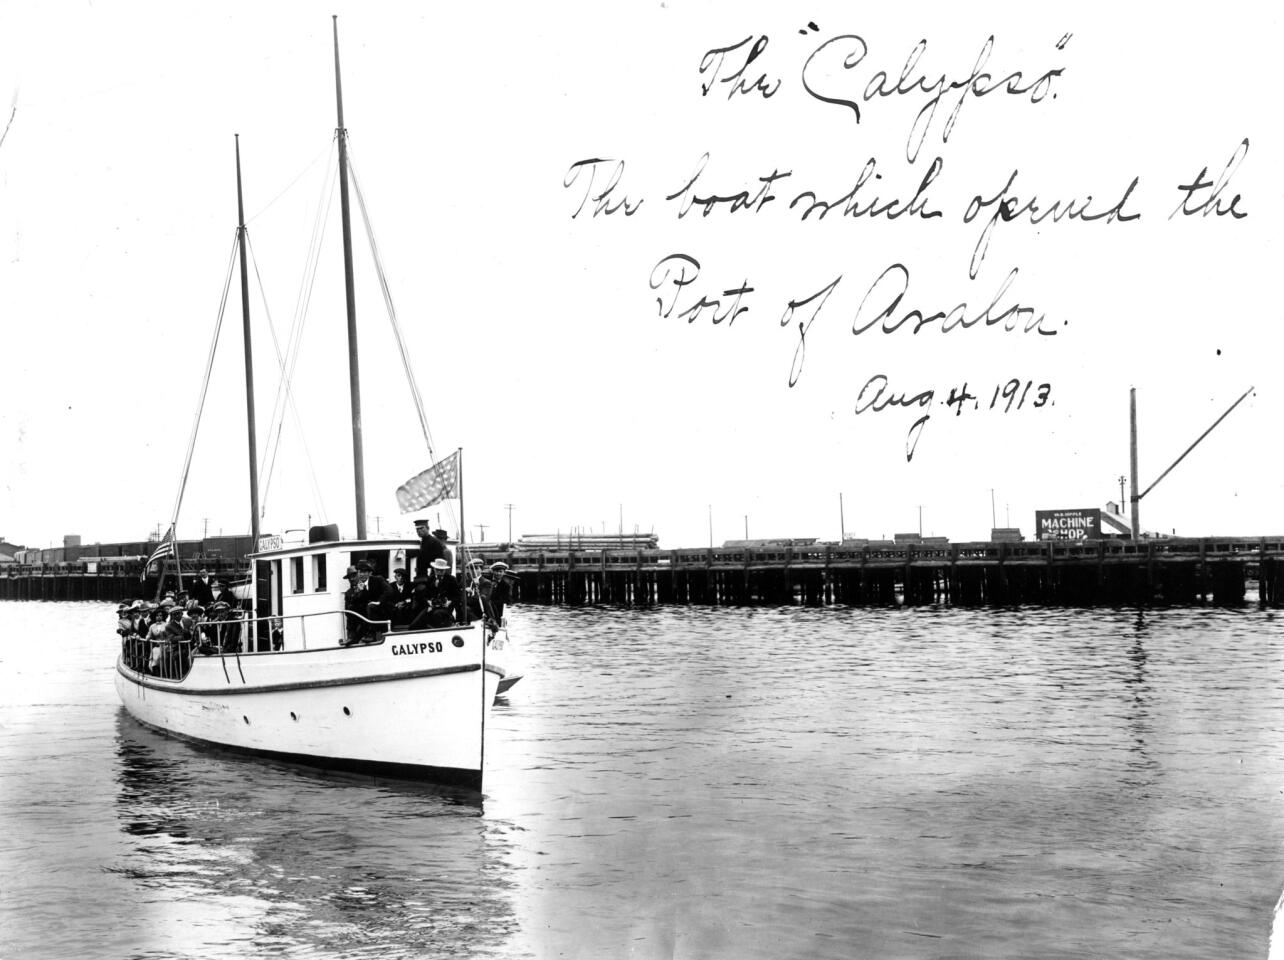 The Calypso, the boat that opened the Port of Avalon.